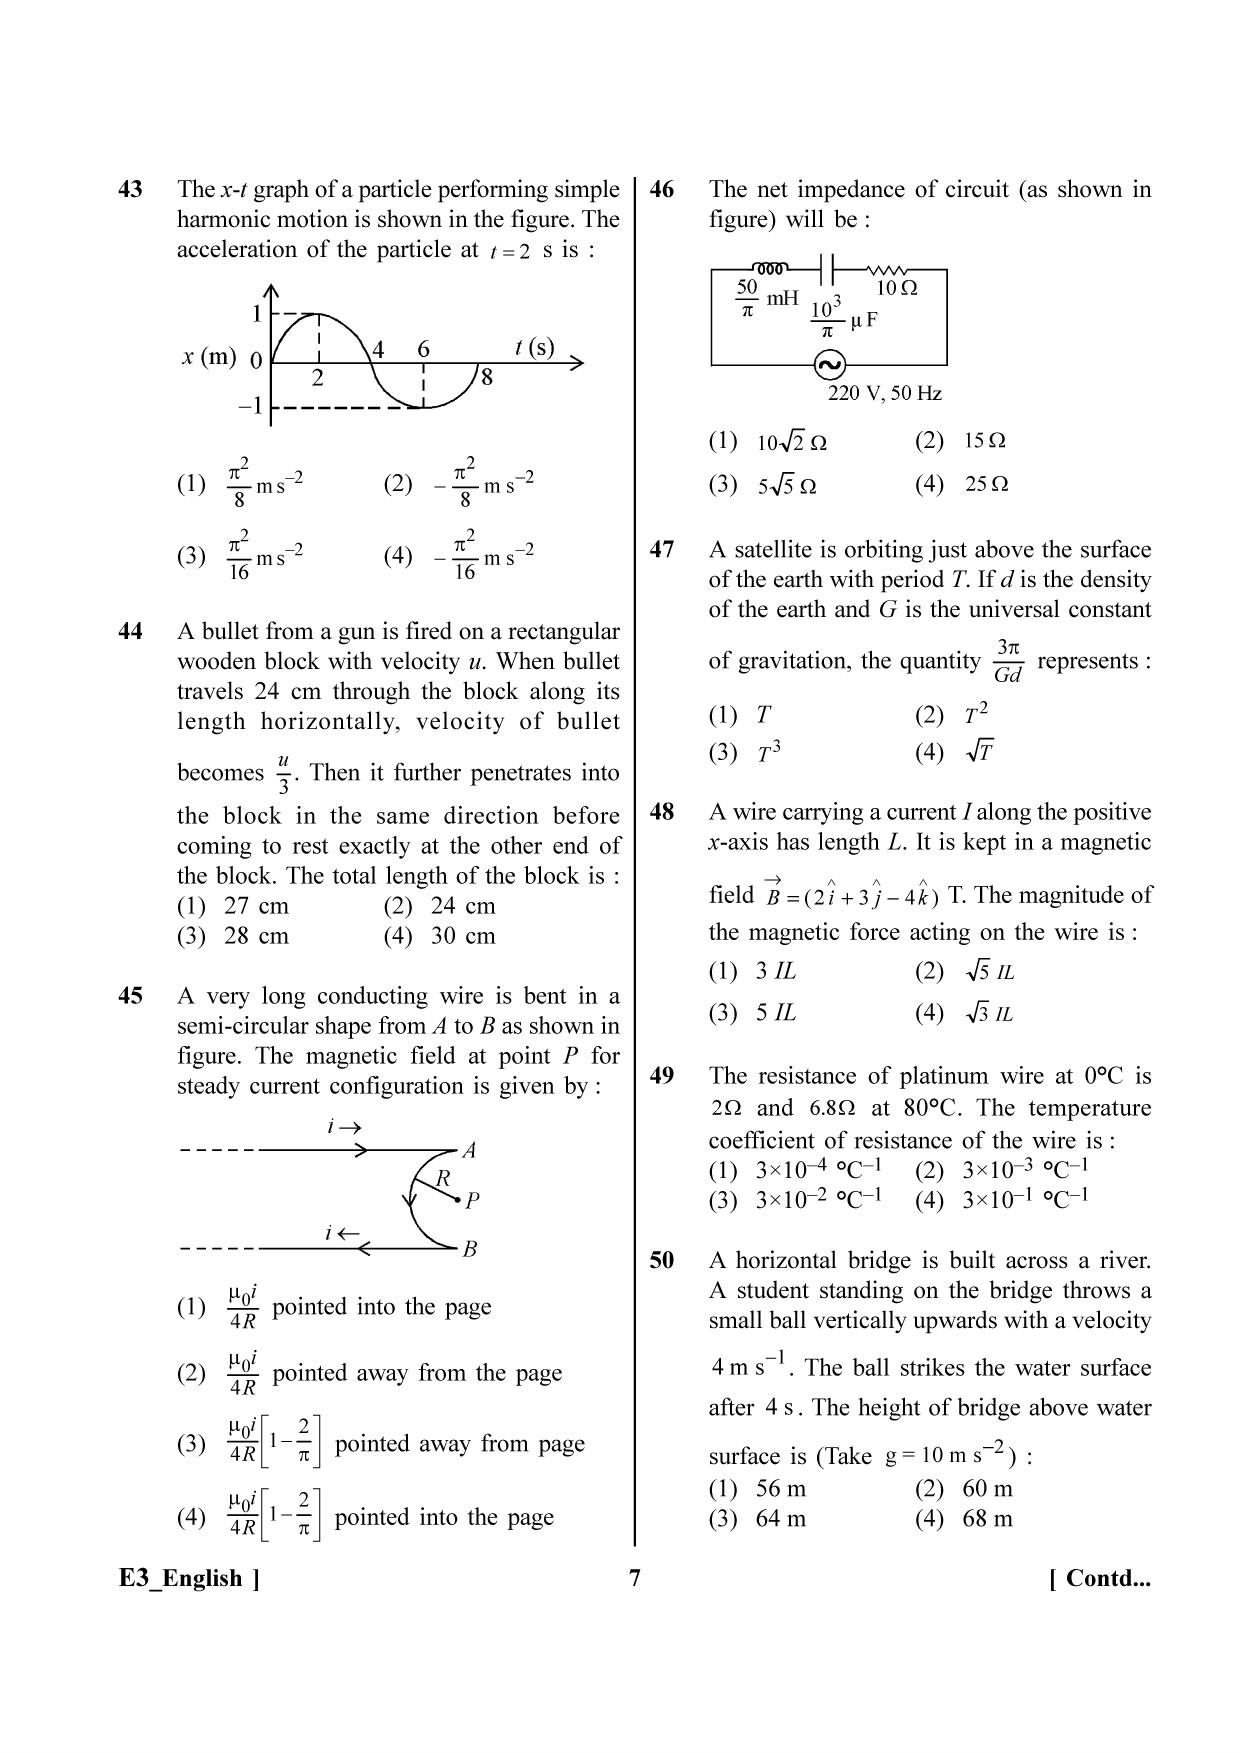 NEET 2023 H5 Official Answer Key - Page 7